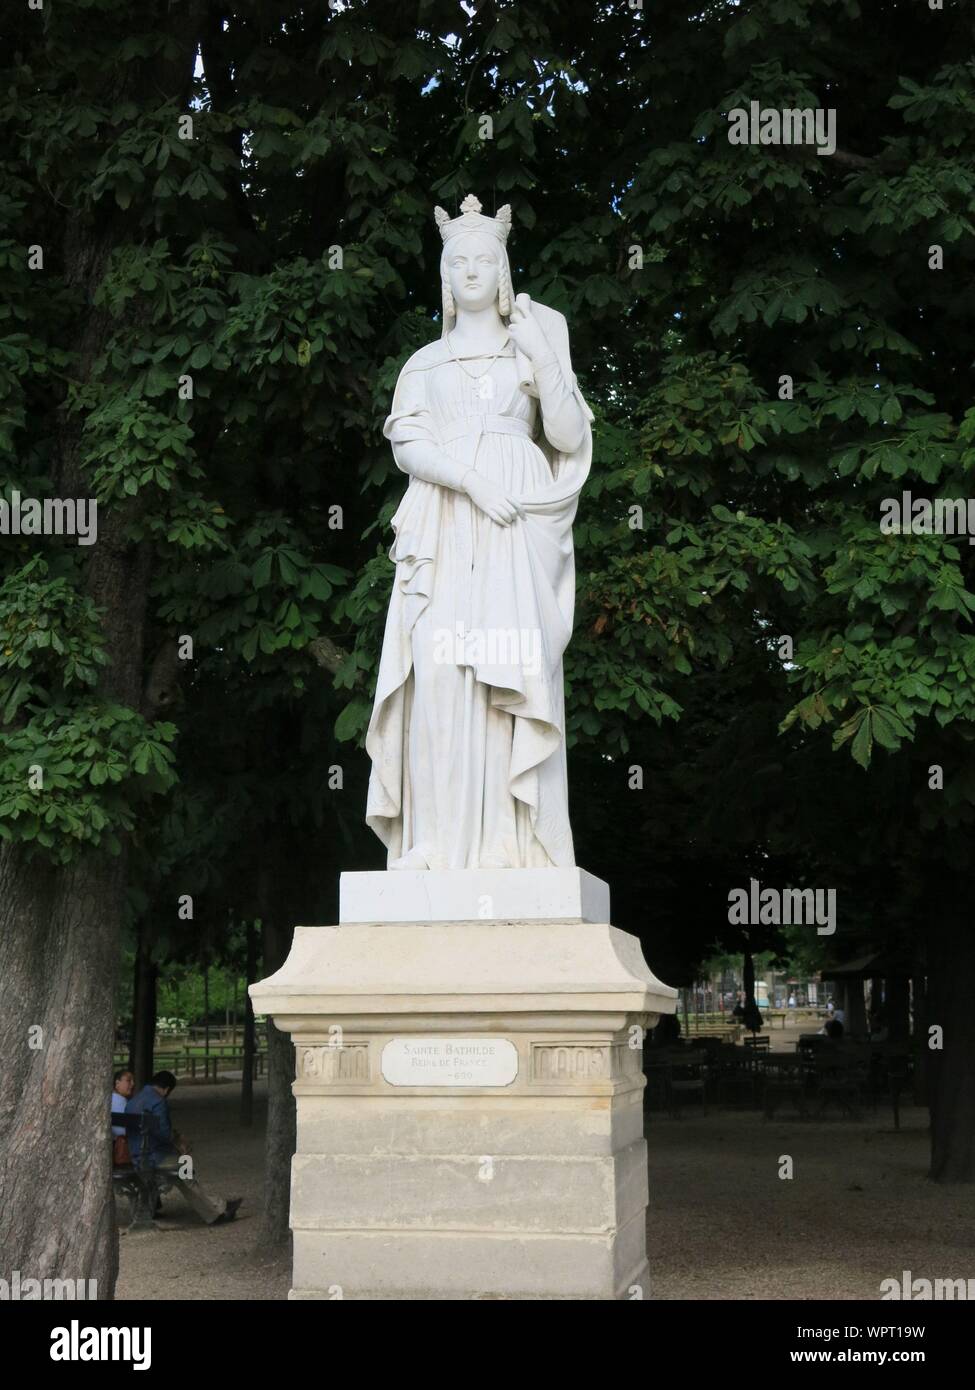 French History: one of the Queens of France Statues, this statue is of the Merovingian Queen Balthild who died in 680 and was later canonised. Stock Photo